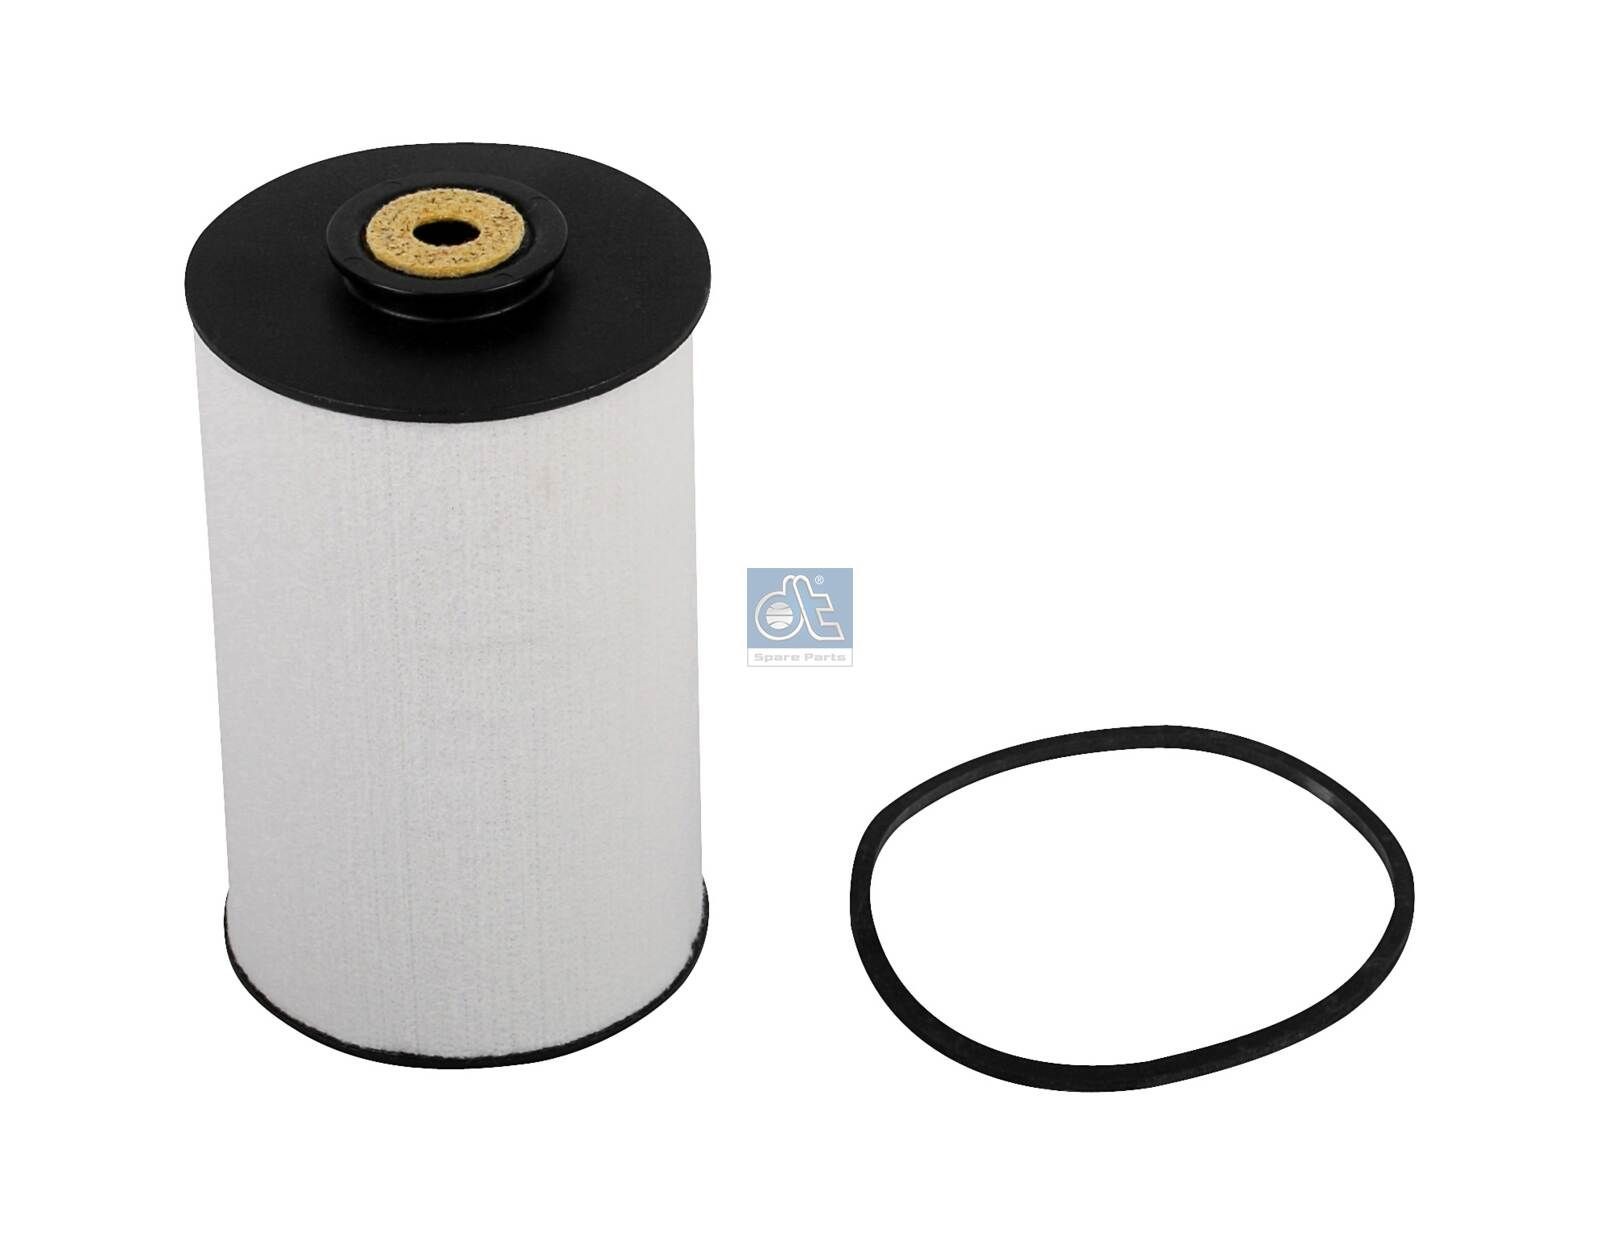 BFU 900 x DT Spare Parts 4.61531 Fuel filter A000 090 14 51